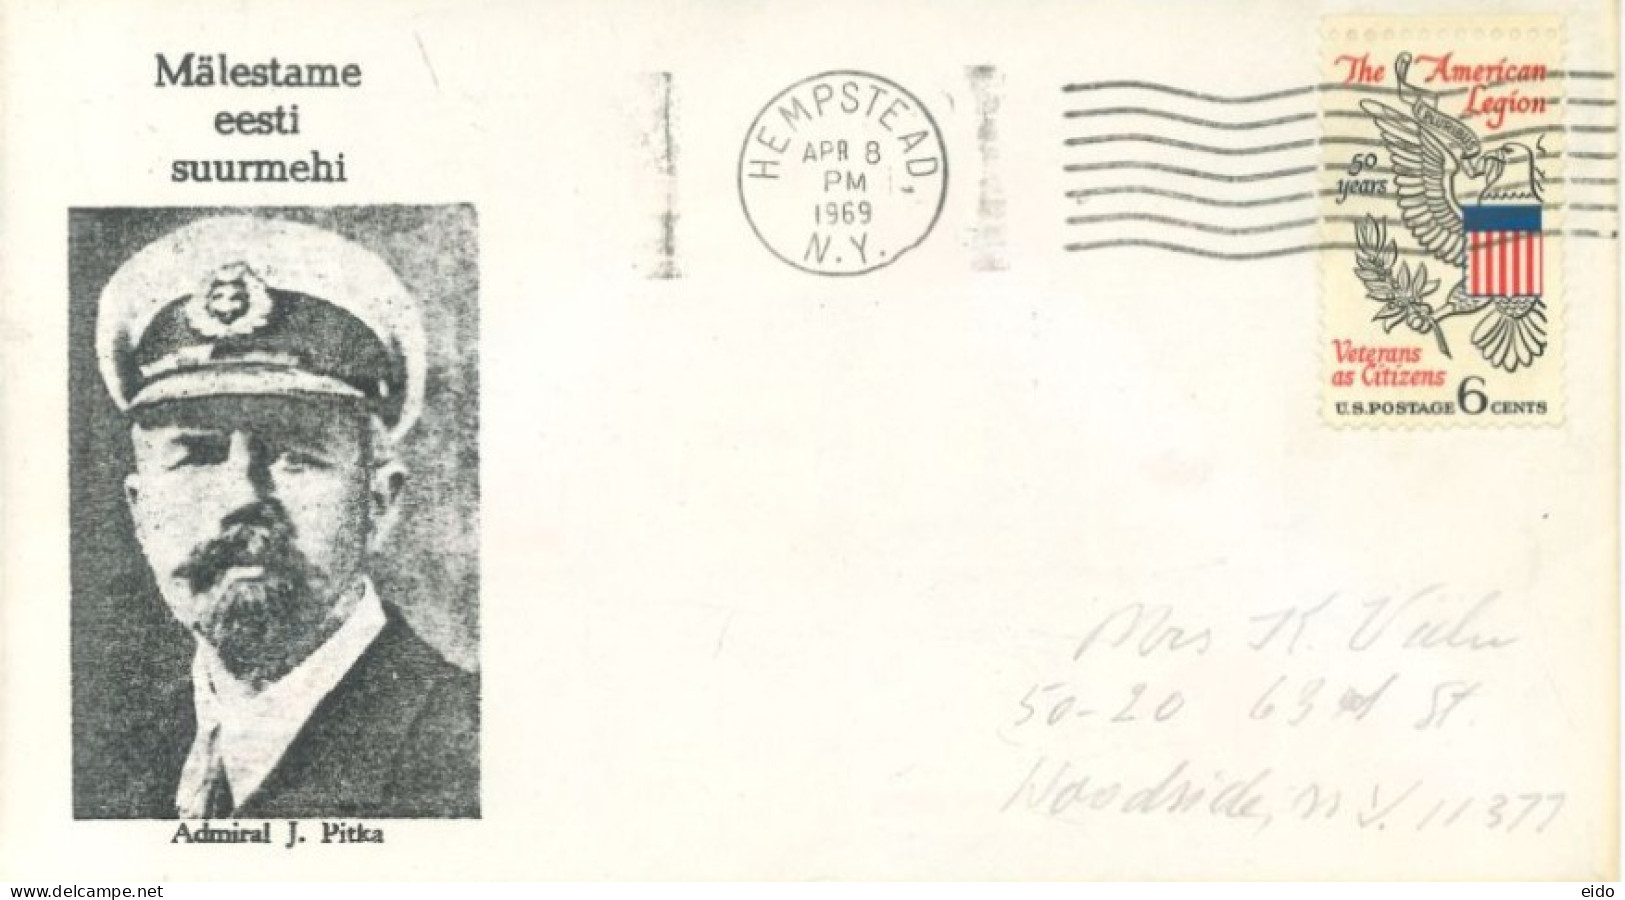 U.S.A.. -1969 -  SPECIAL STAMP COVER OF ADMIRAL J. PITKA SENT TO NEW YORK. - Covers & Documents